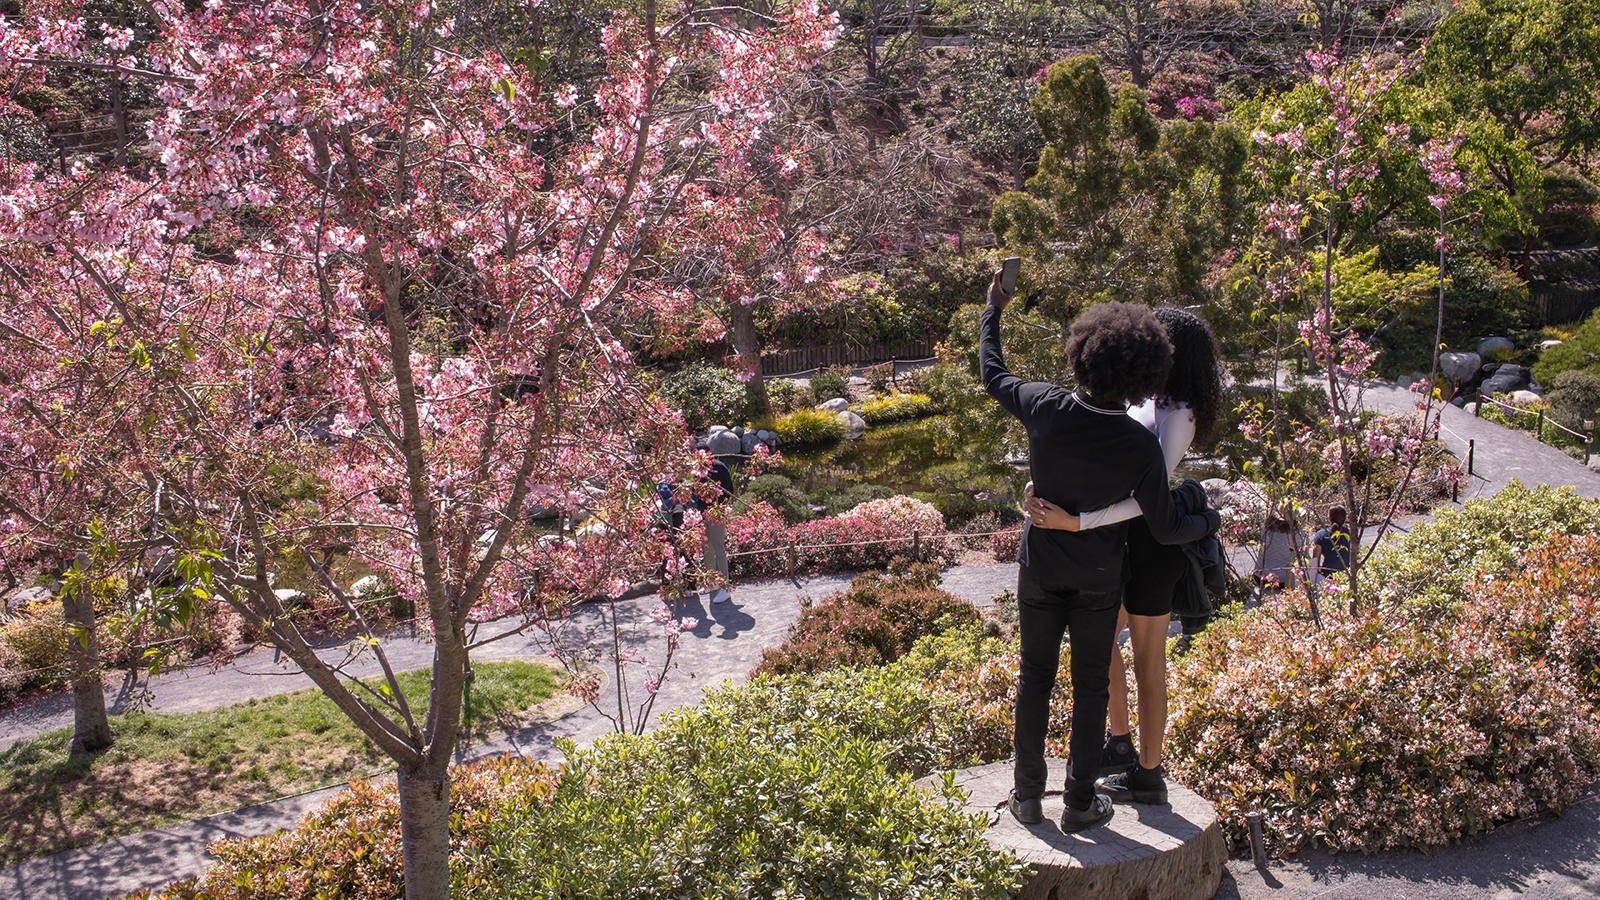 Young couple is taking a selfie in the scenic view of blossoming cherry trees in Japanese Friendship Garden, San Diego, California, on March 24, 2023